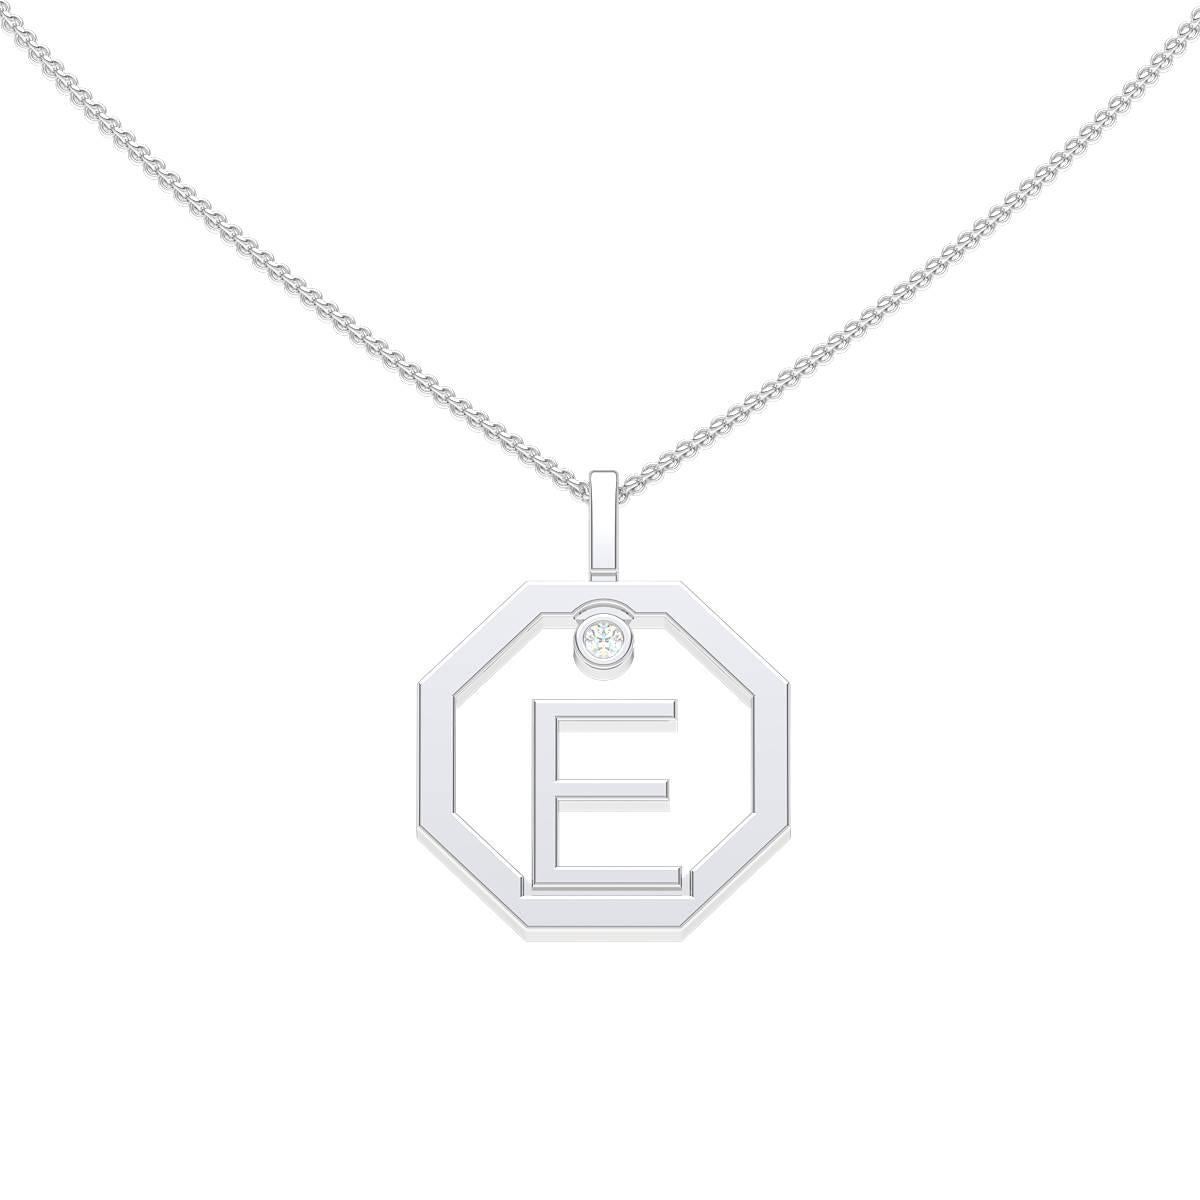 Our diamond initial pendant makes the perfect personalised gift. Handcrafted to order in our Sydney studios in 18 karat yellow/white/rose gold and set with a sparkling diamond, this timeless octagonal pendant is sure to delight. Chains sold